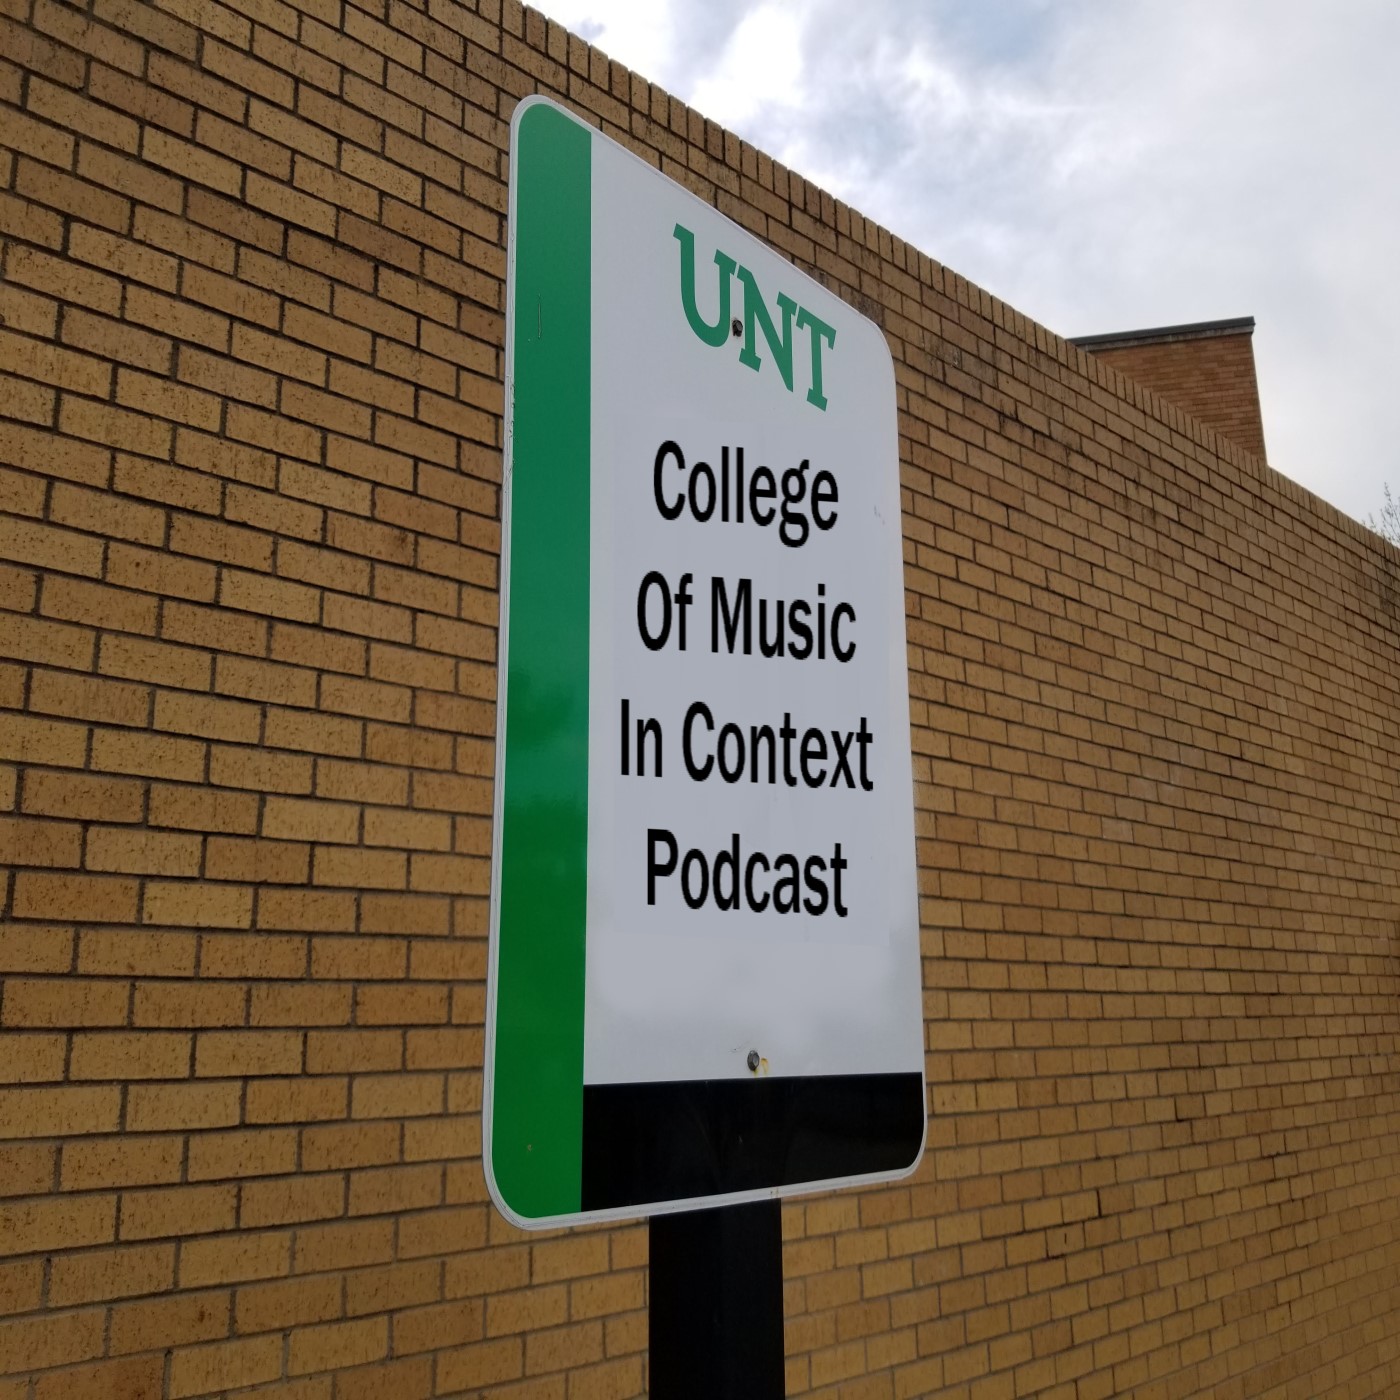 UNT College of Music in Context